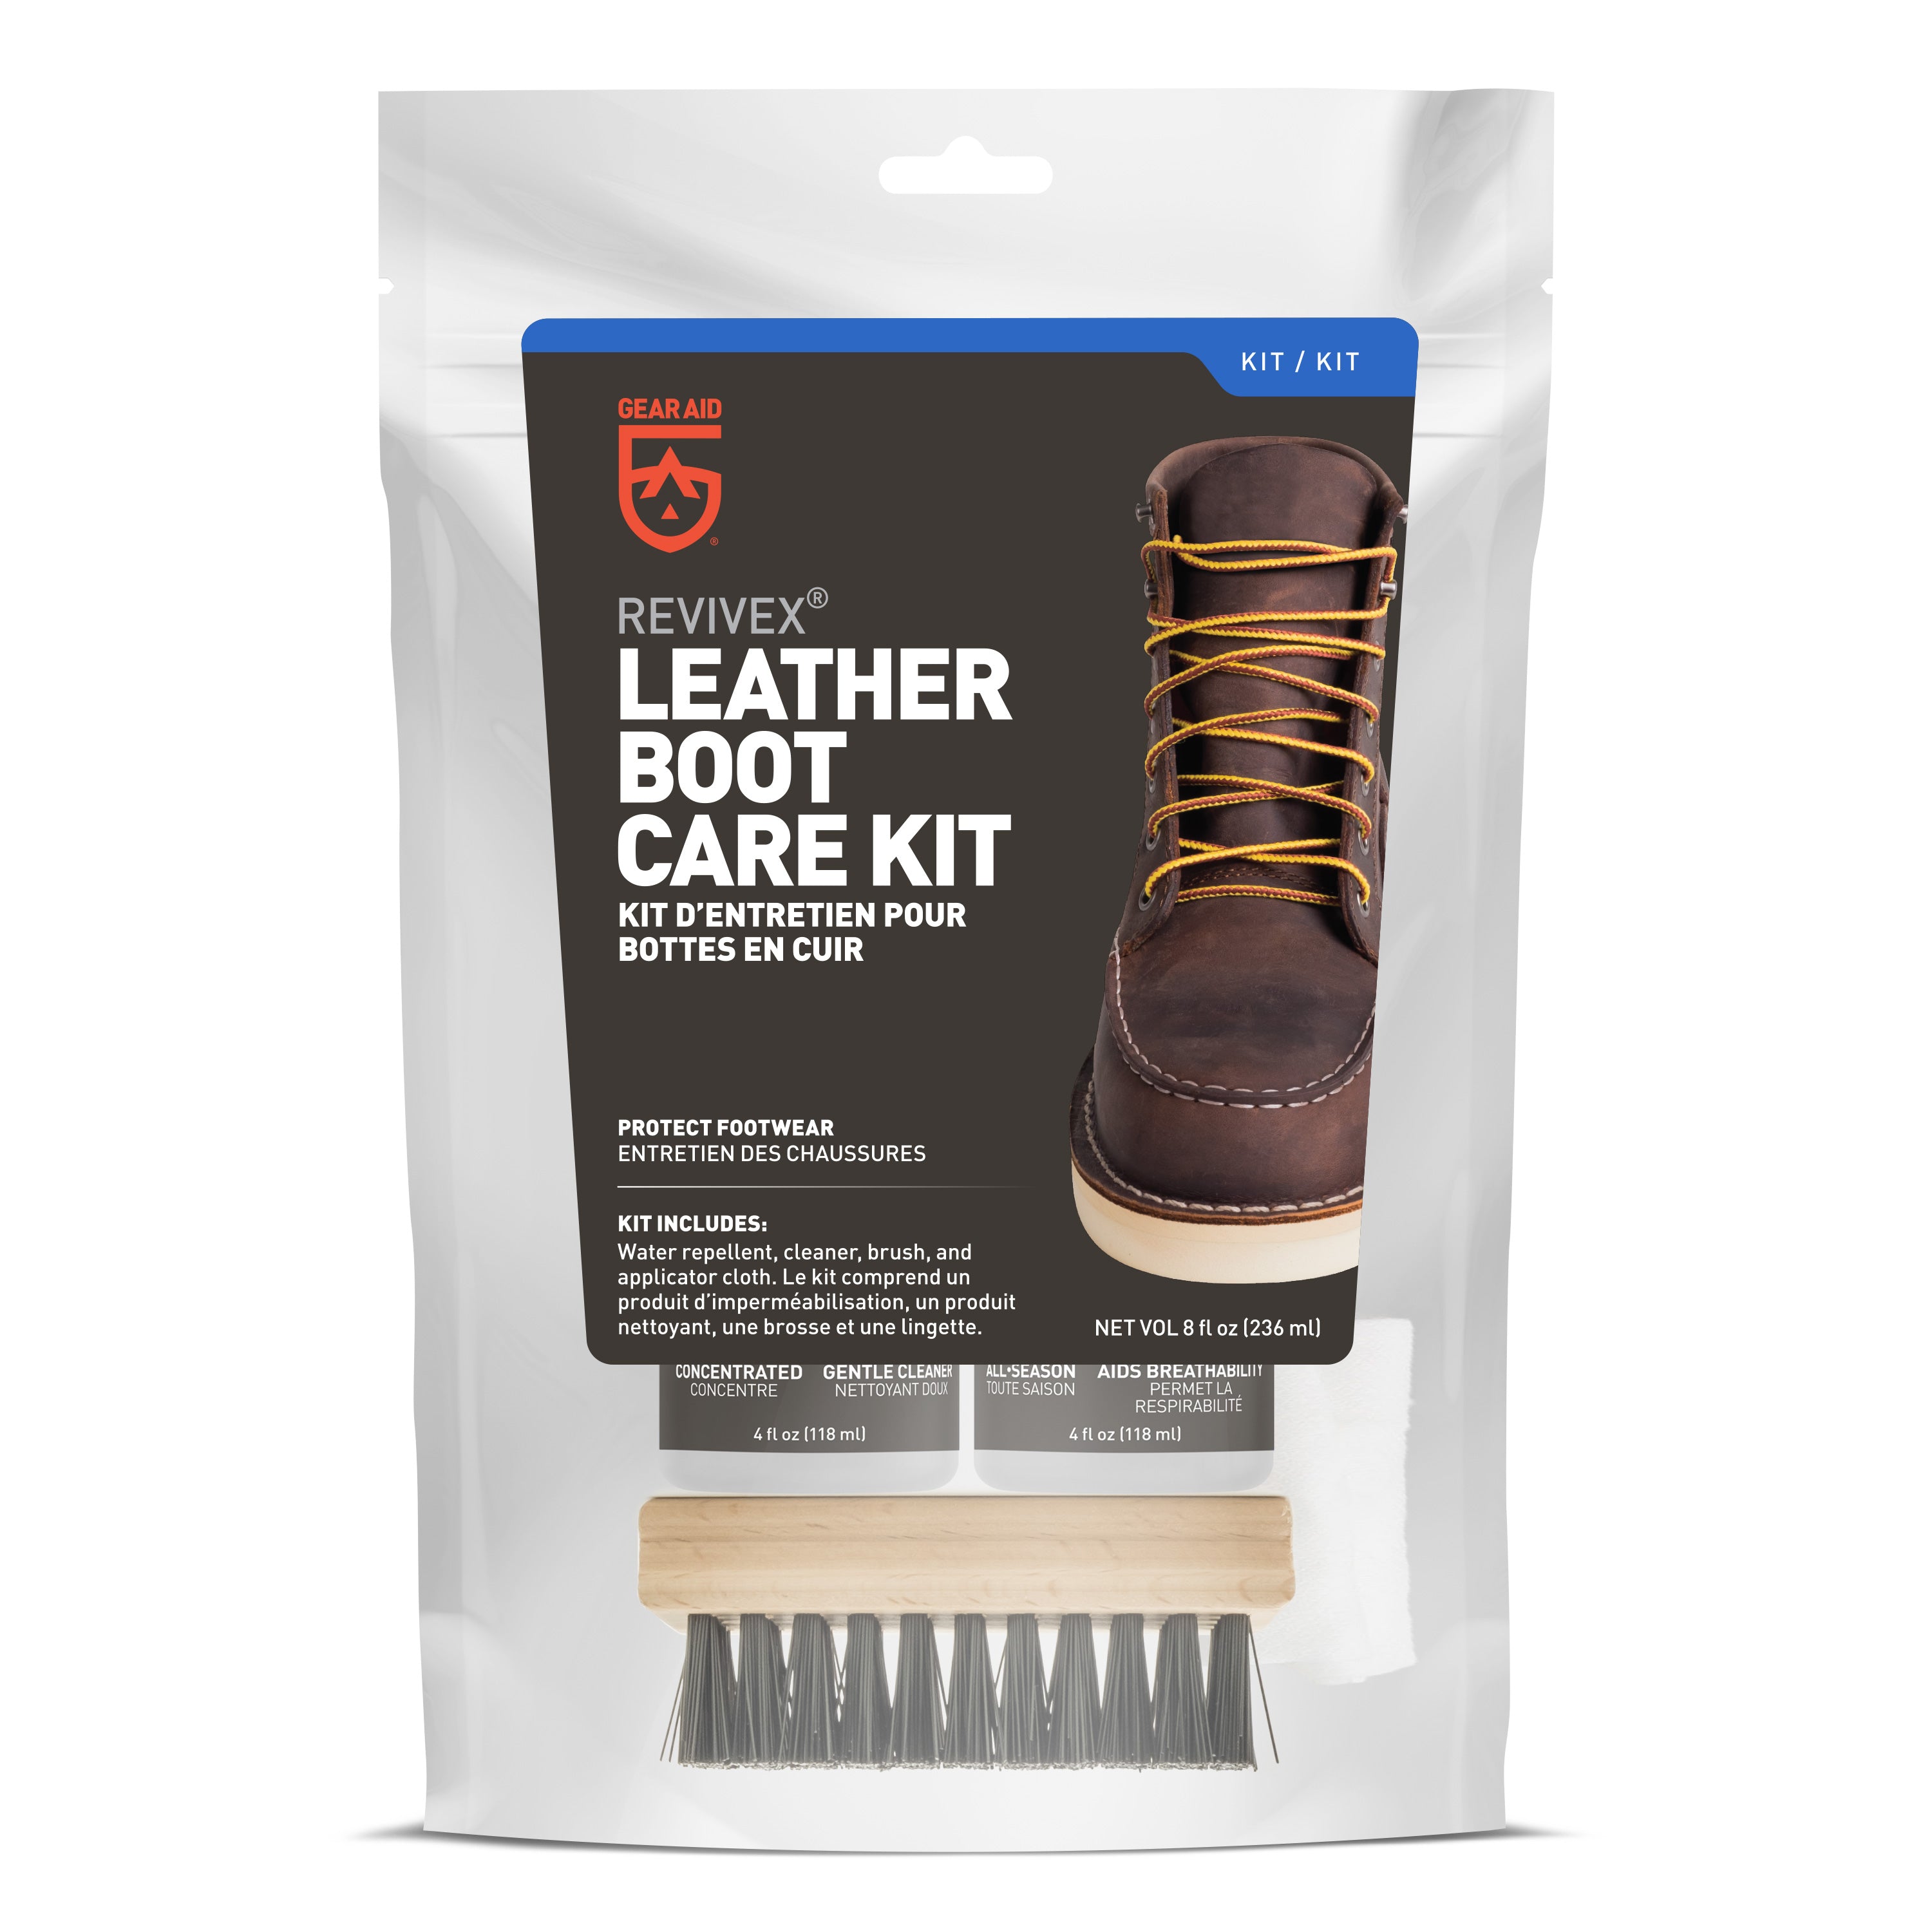 boot care products